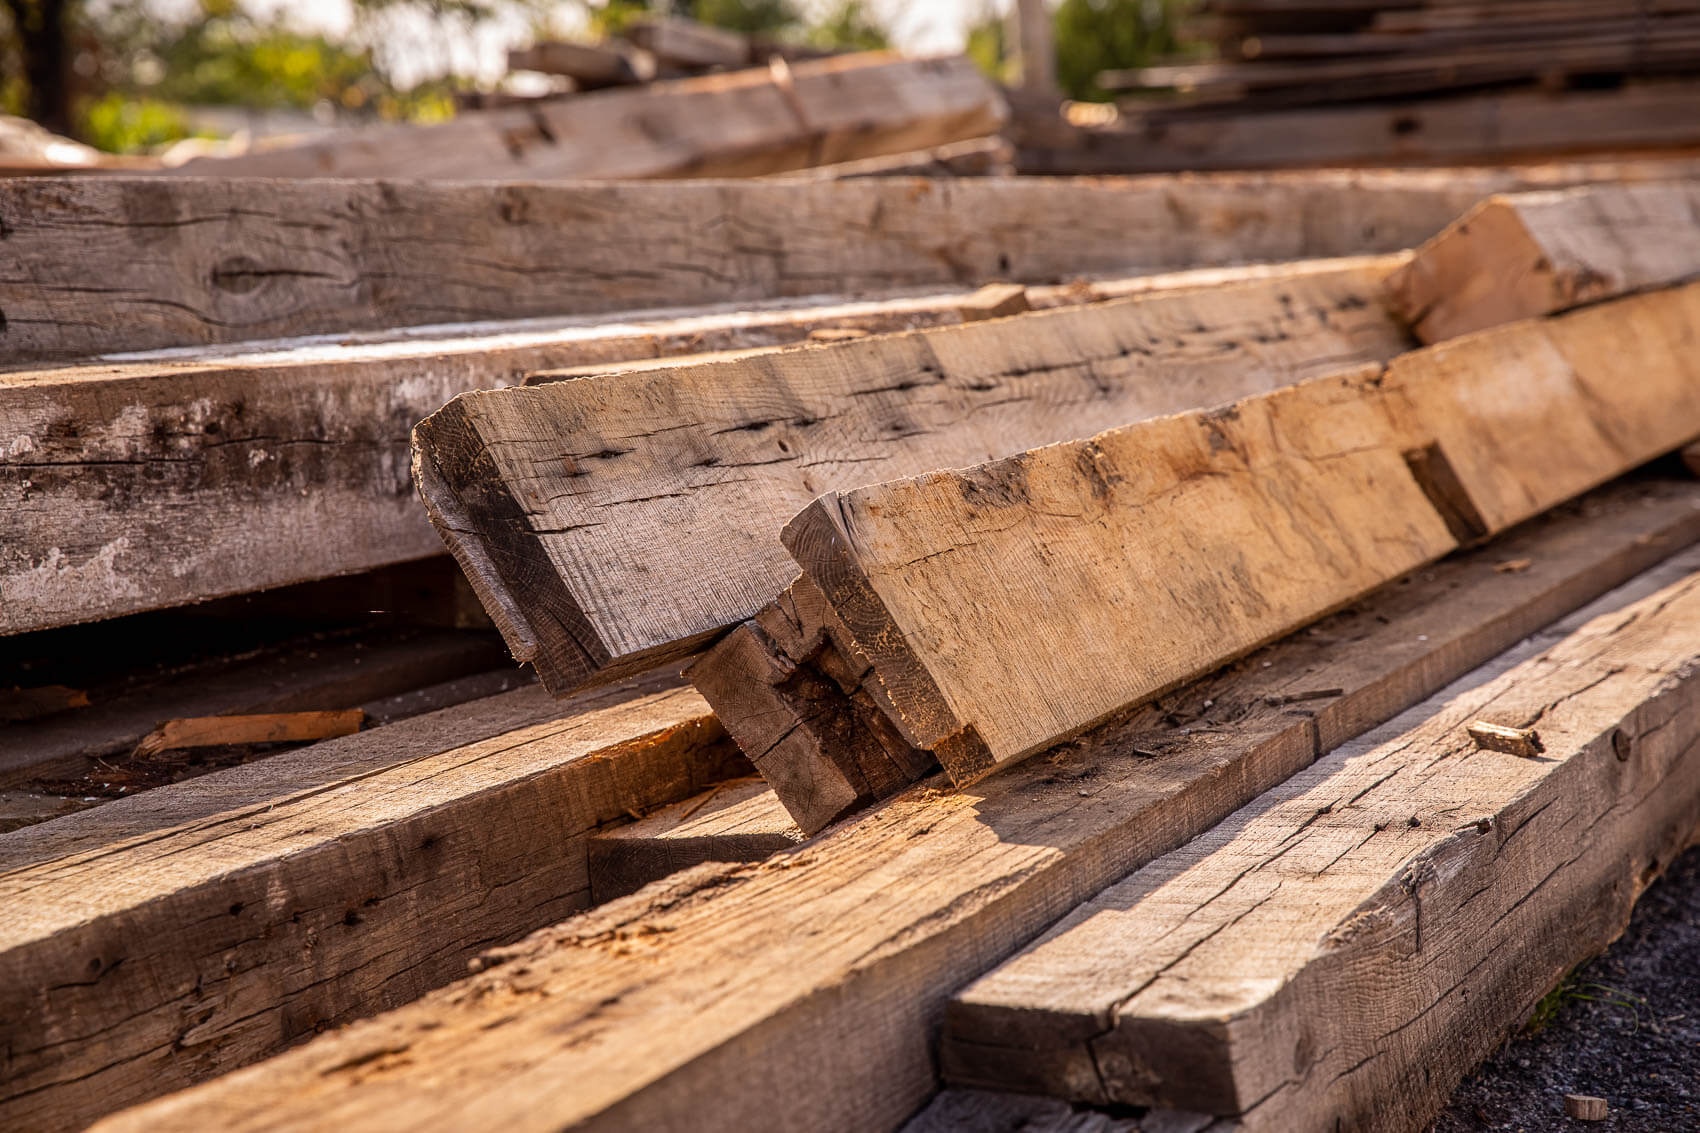 Stack of old reclaimed wood barn beams after a barn demolition.